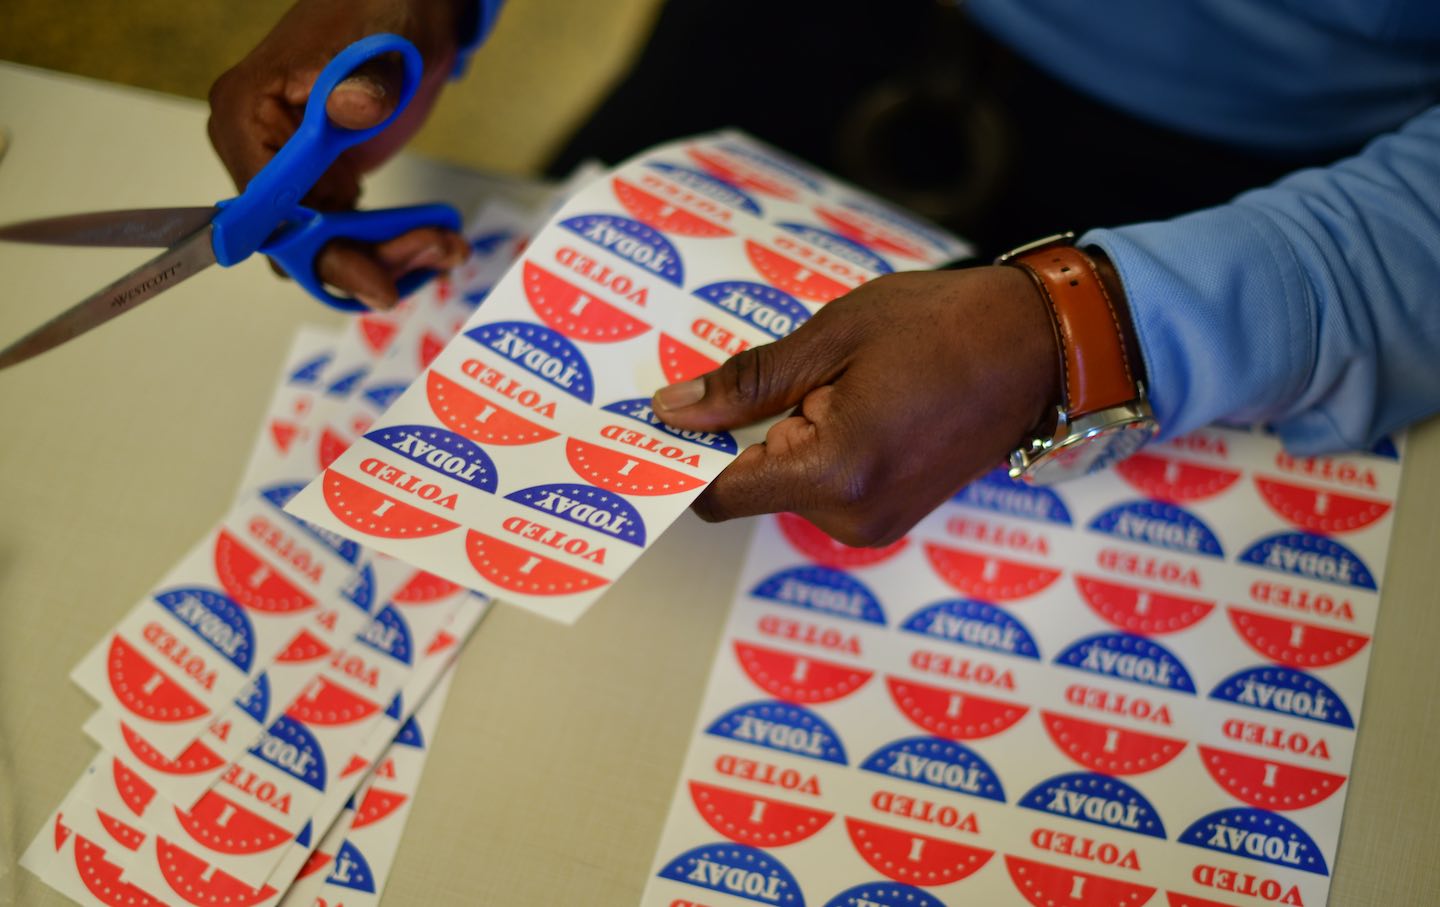 What’s Missing From Voting Data? Race.